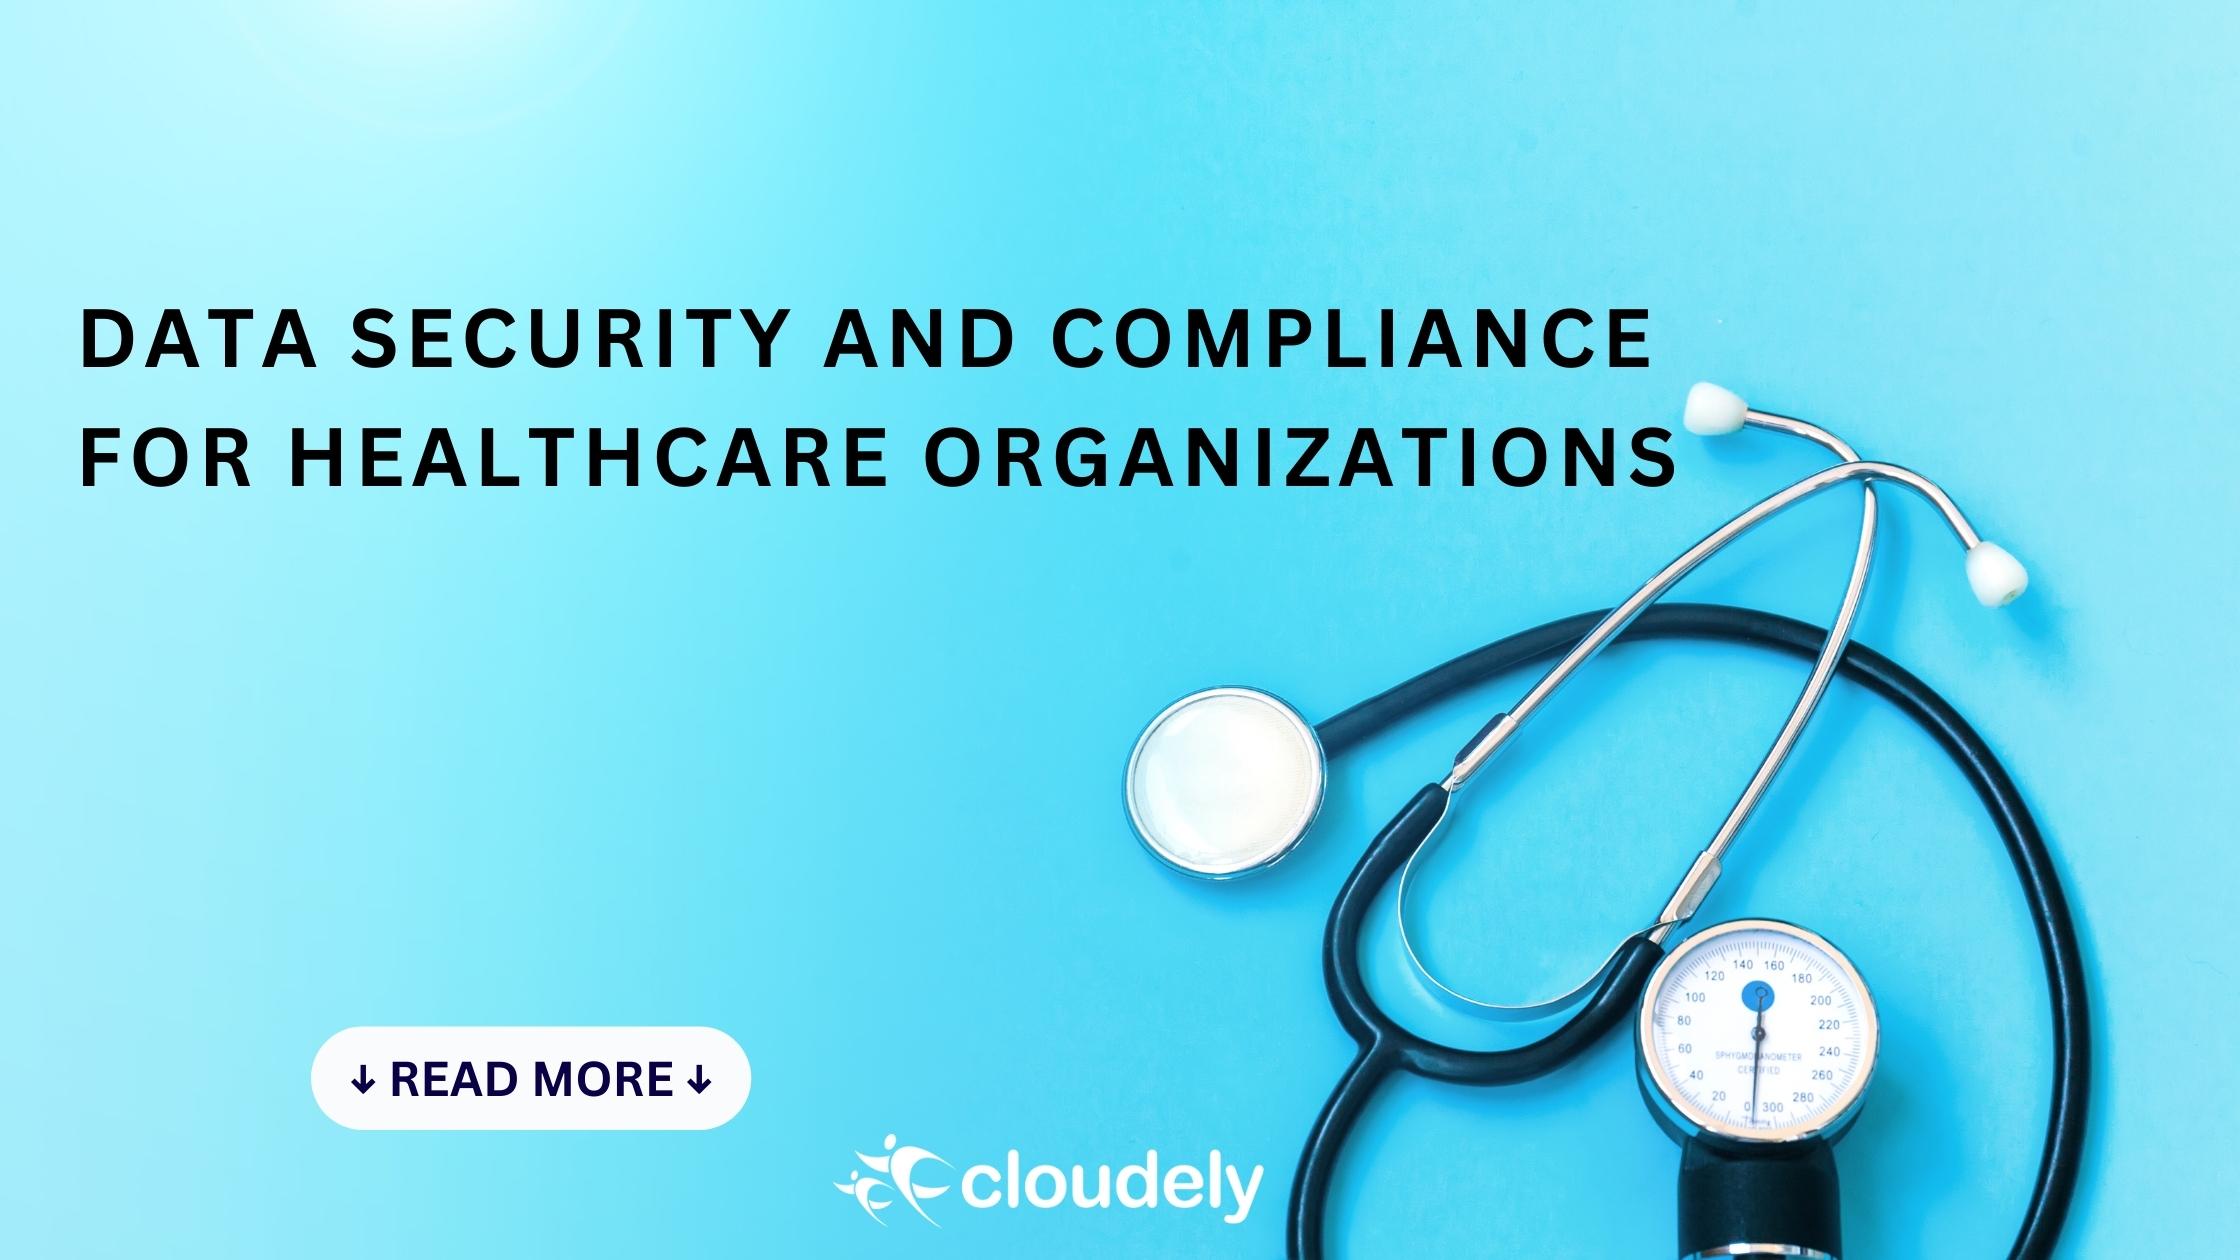 Data security and compliance for healthcare organizations